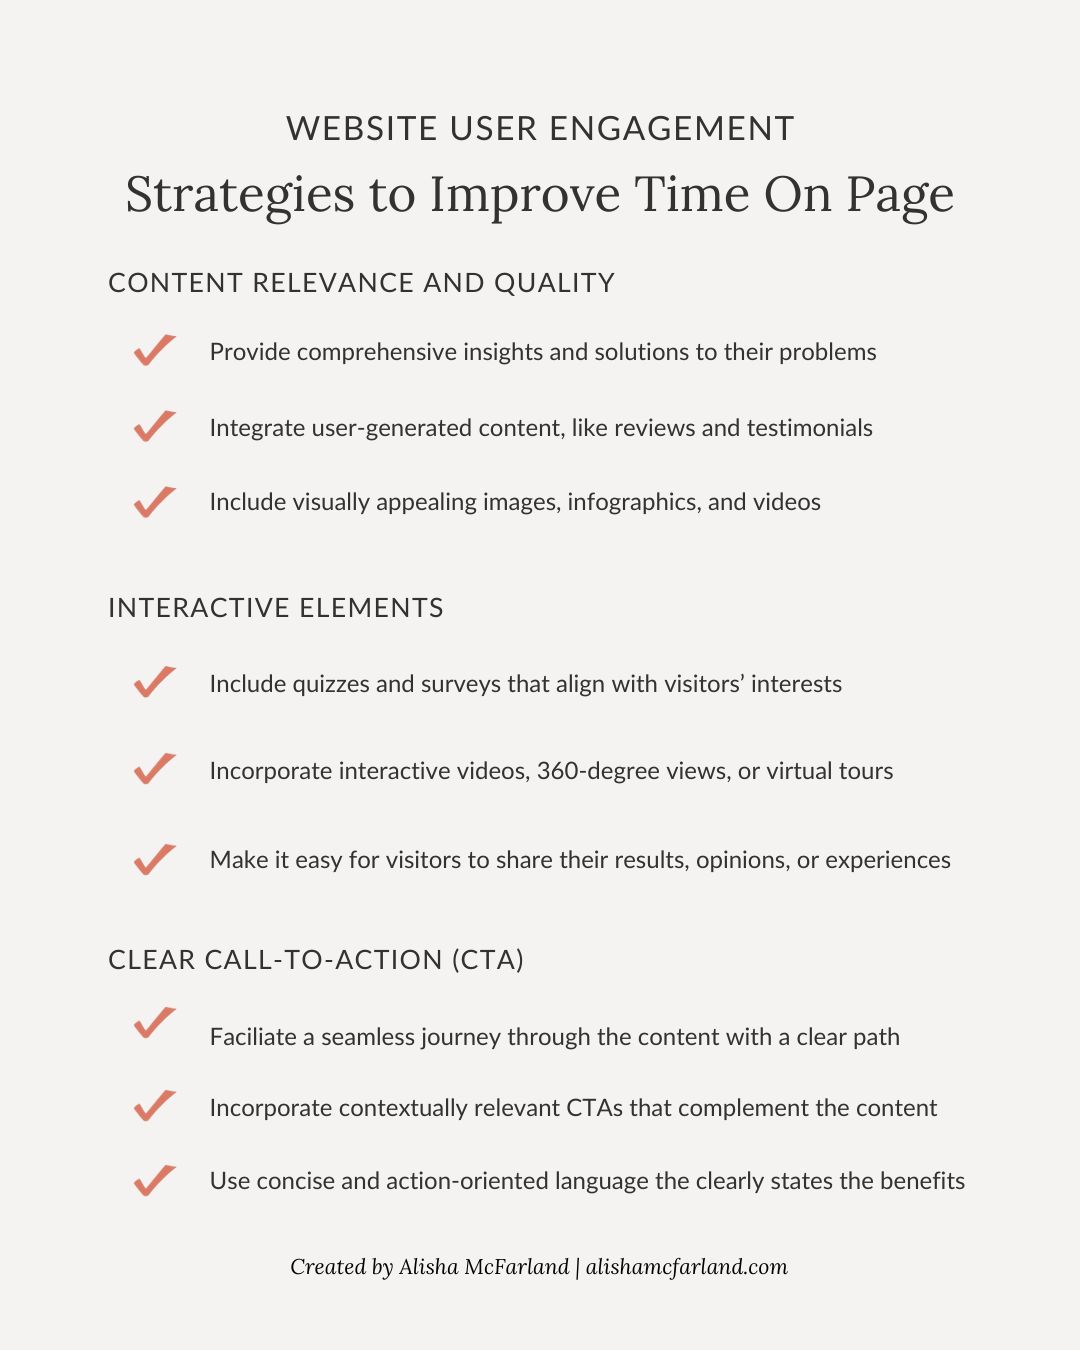 Website User Engagement Strategies to Improve Time on Page checklist